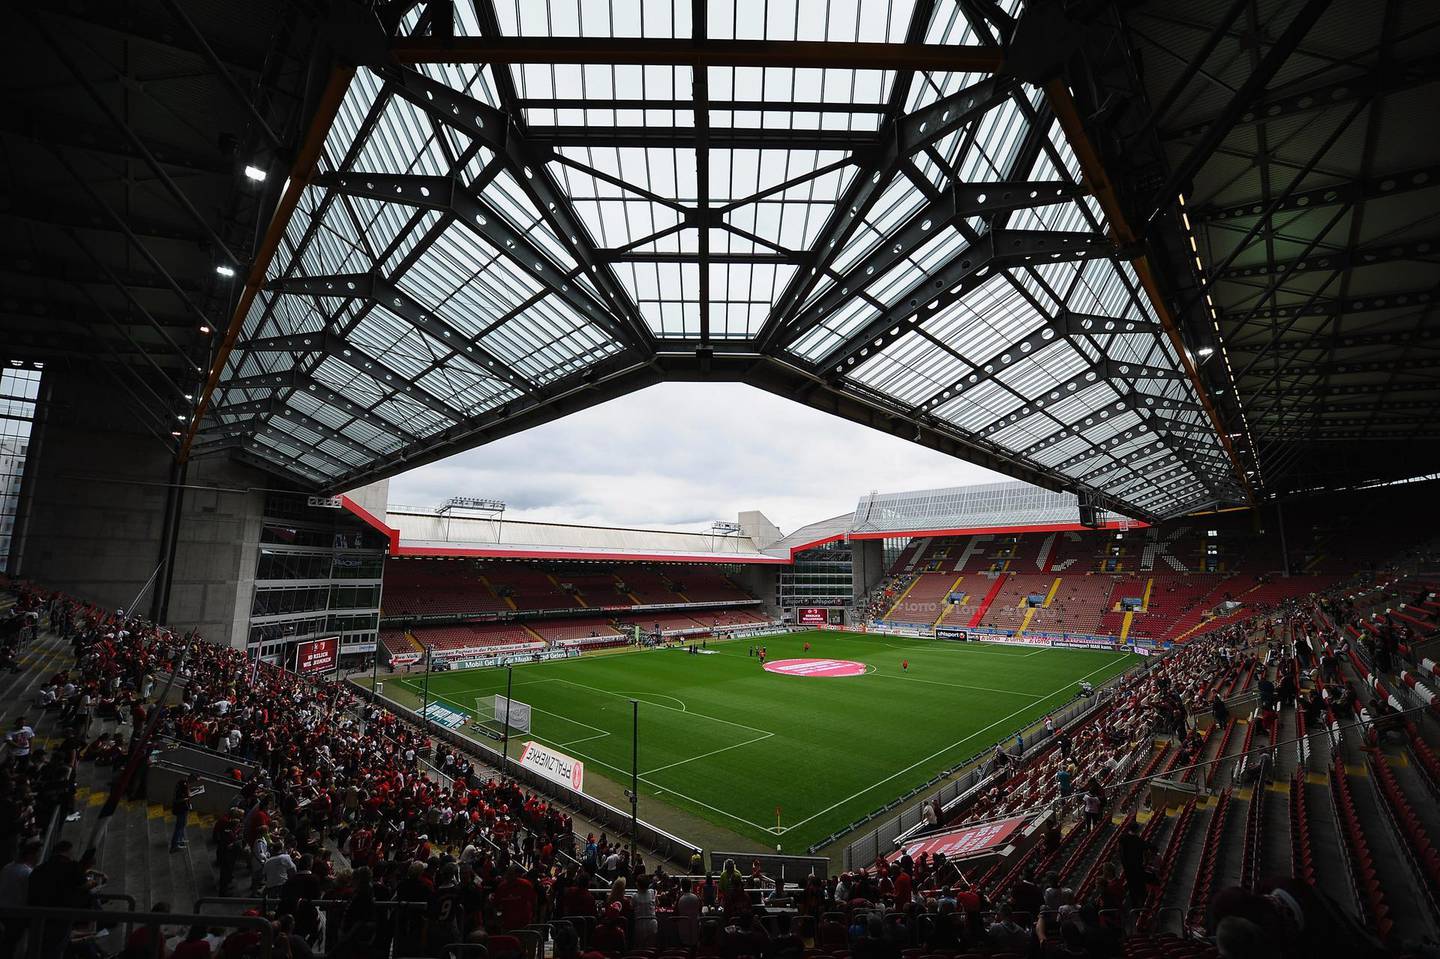 KAISERSLAUTERN, GERMANY - AUGUST 14:   A general inside view of the Fritz-Walter-Stadium is pictured prior to the Bundesliga match between 1. FC Kaiserslautern and FC Augsburg at Fritz-Walter-Stadion on August 14, 2011 in Kaiserslautern, Germany.  (Photo by Dennis Grombkowski/Bongarts/Getty Images)